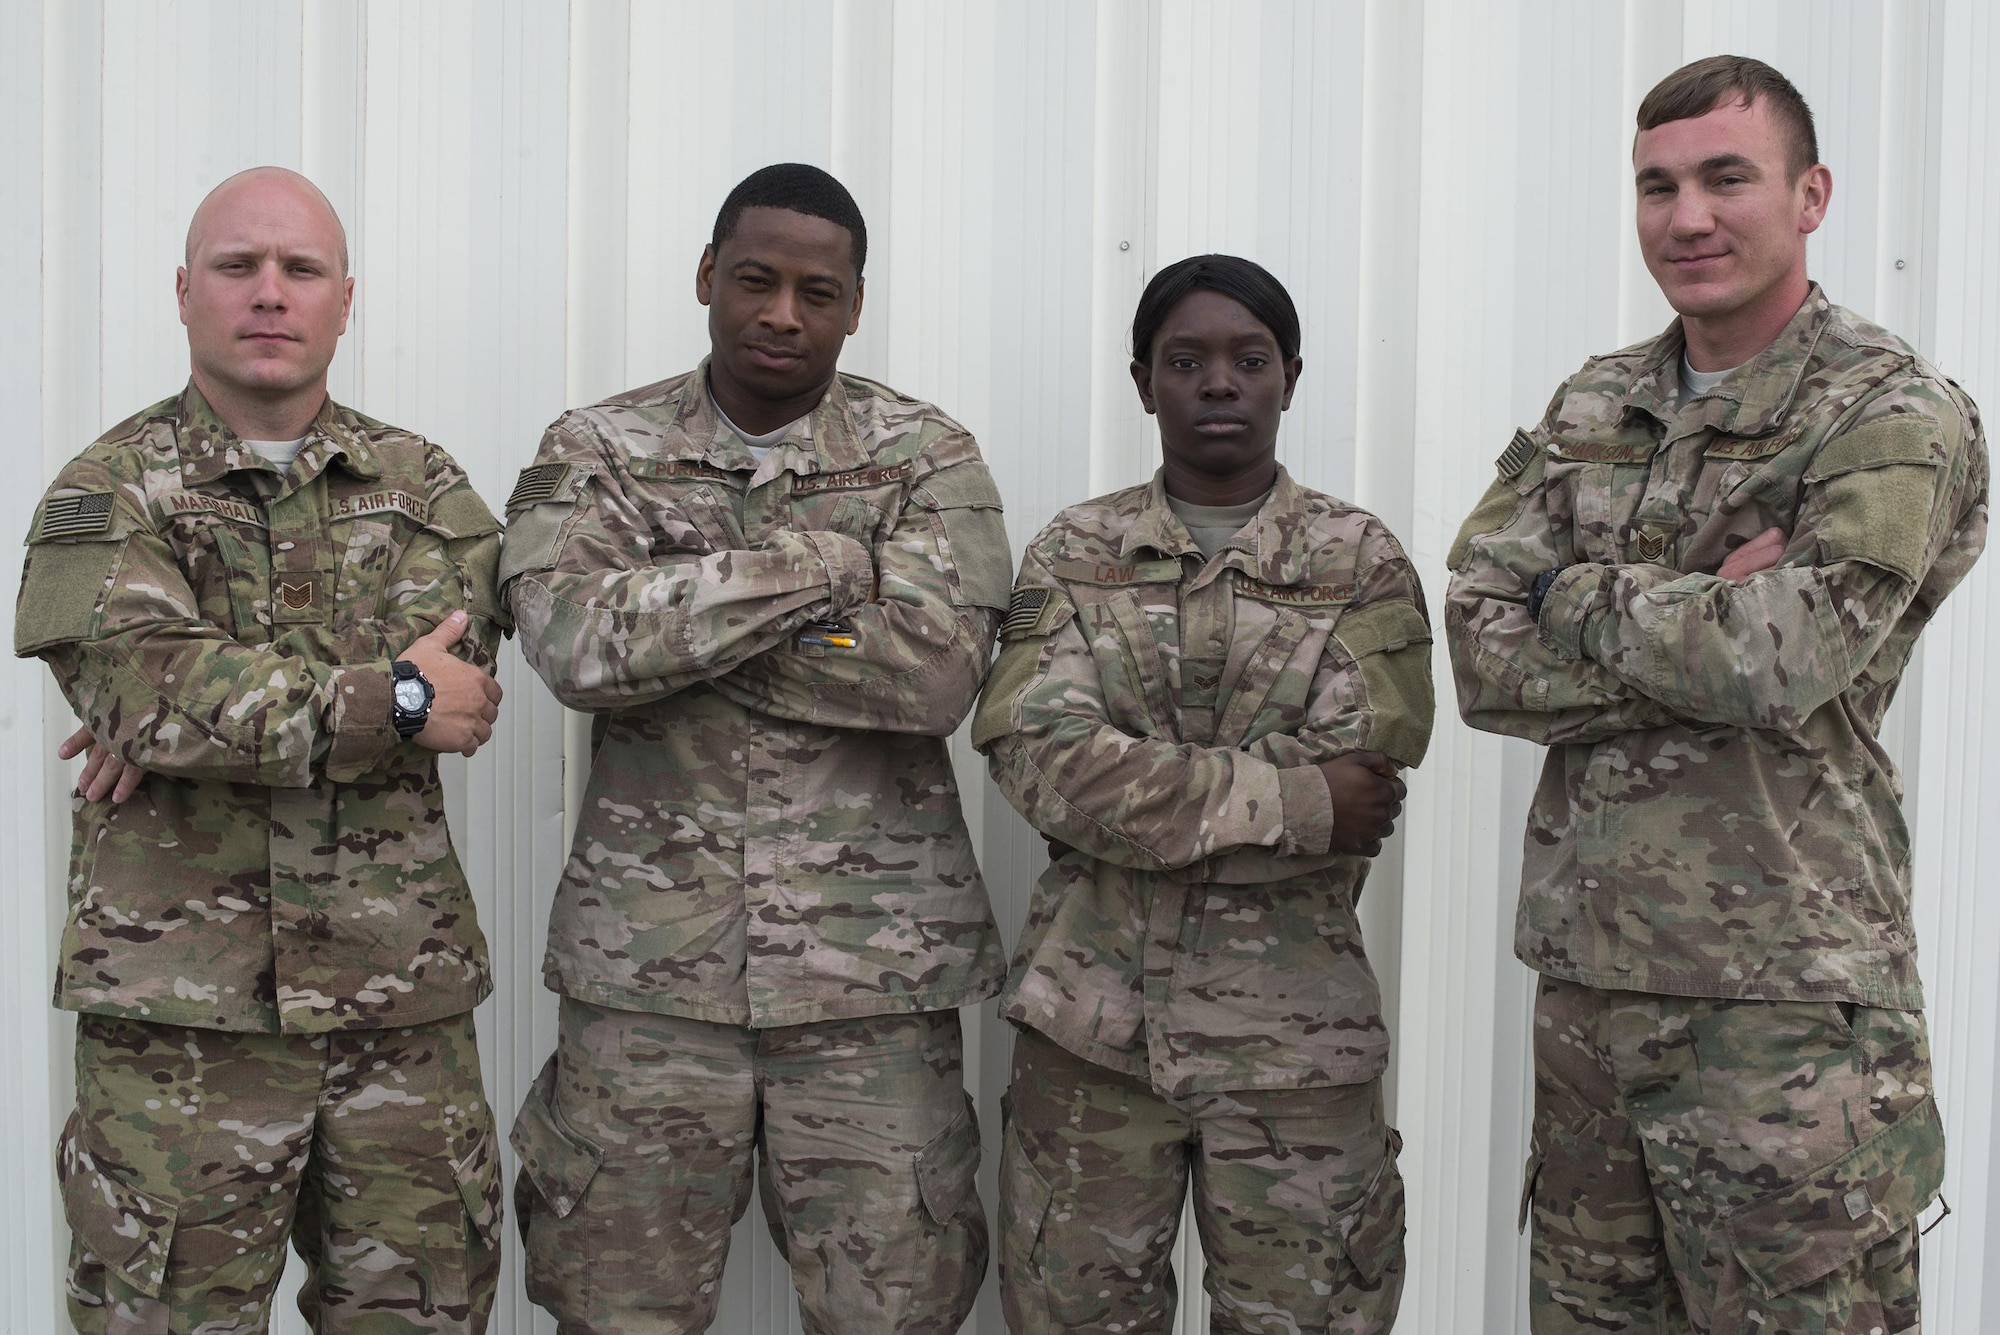 U.S. Air Force Airmen from the 823d Base Defense Squadron pose for a photo, April 15, 2016, at Avon Park Air Force Range, Fla. Spartan Warrior week allowed Airmen assigned to various squadrons across the U.S. to split into teams of four and compete in generalized and career based challenges. (U.S. Air Force photo by Airman 1st Class Janiqua P. Robinson/Released)